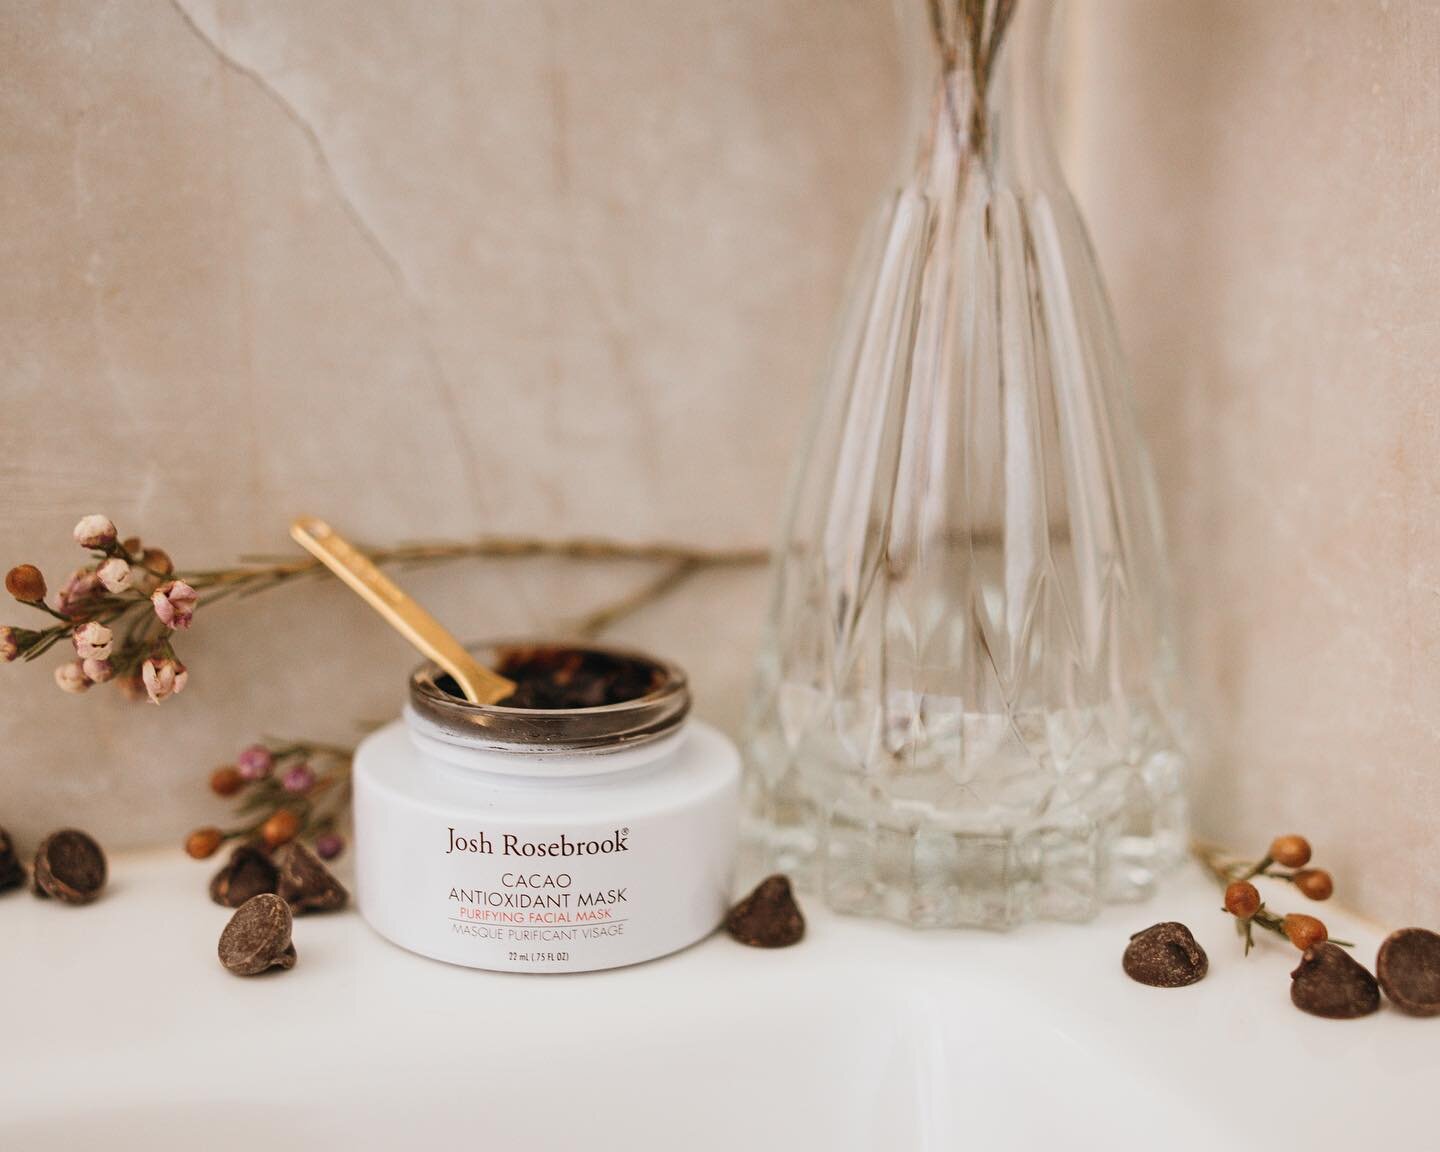 #JoshRosebrookgiftedme Okay this @joshrosebrook cacao antioxidant mask is UNREAL. Not only does it actually smell just like cacao (surprise lol), it also works to rejuvenate and purify the skin. The rich cacao antioxidants help slow skin cell decline